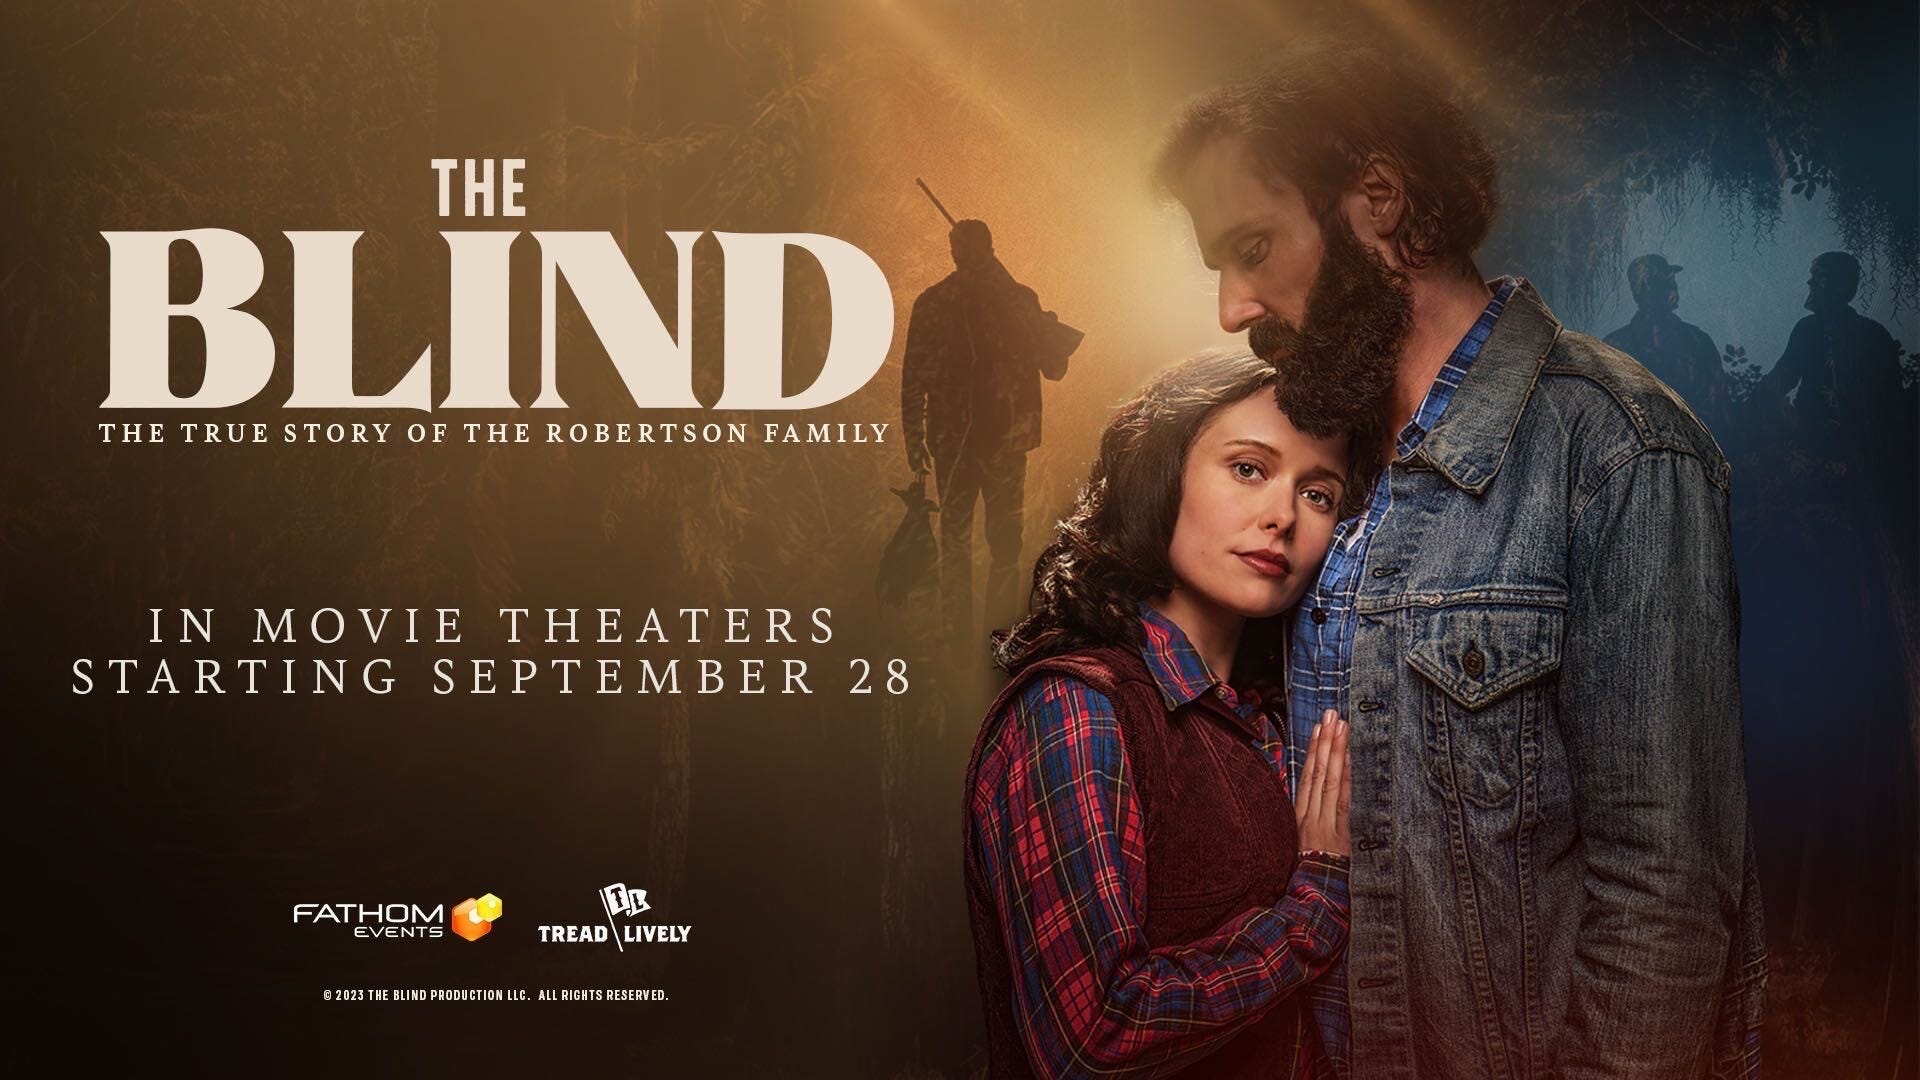 The Blind: The True Story of the Robertson Family Movie